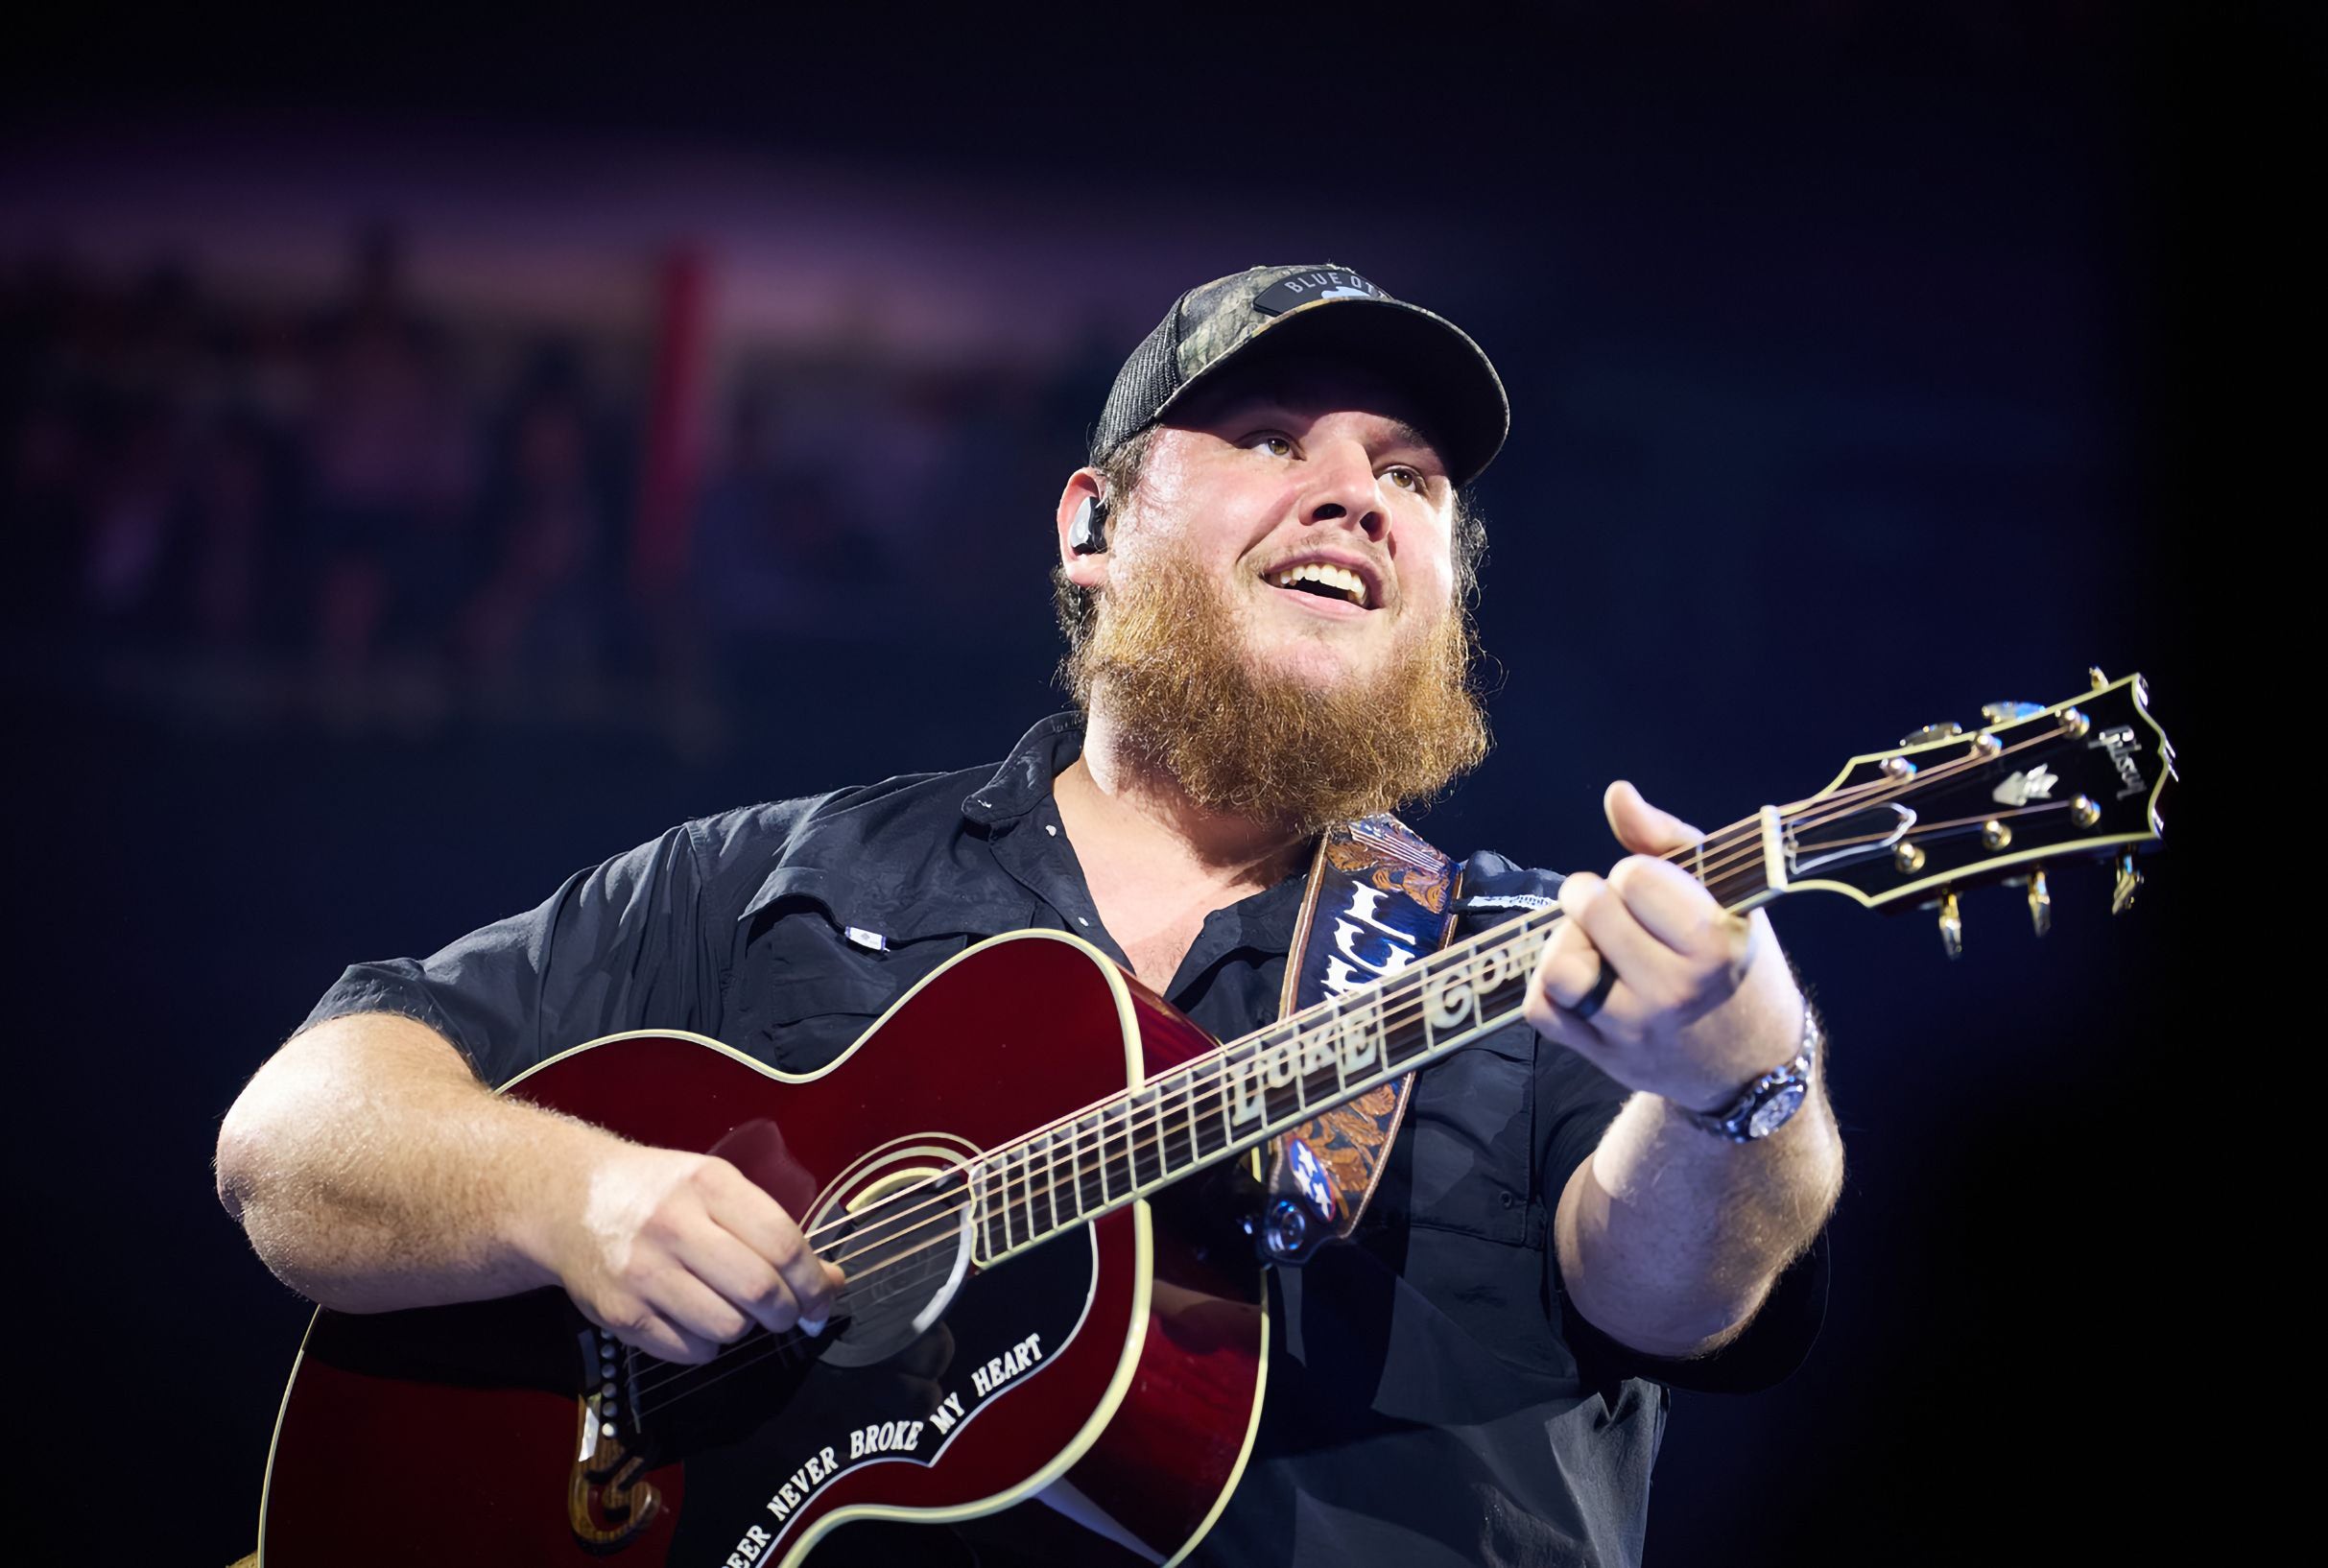 Luke Combs - Growin' Up And Gettin' Old Tour